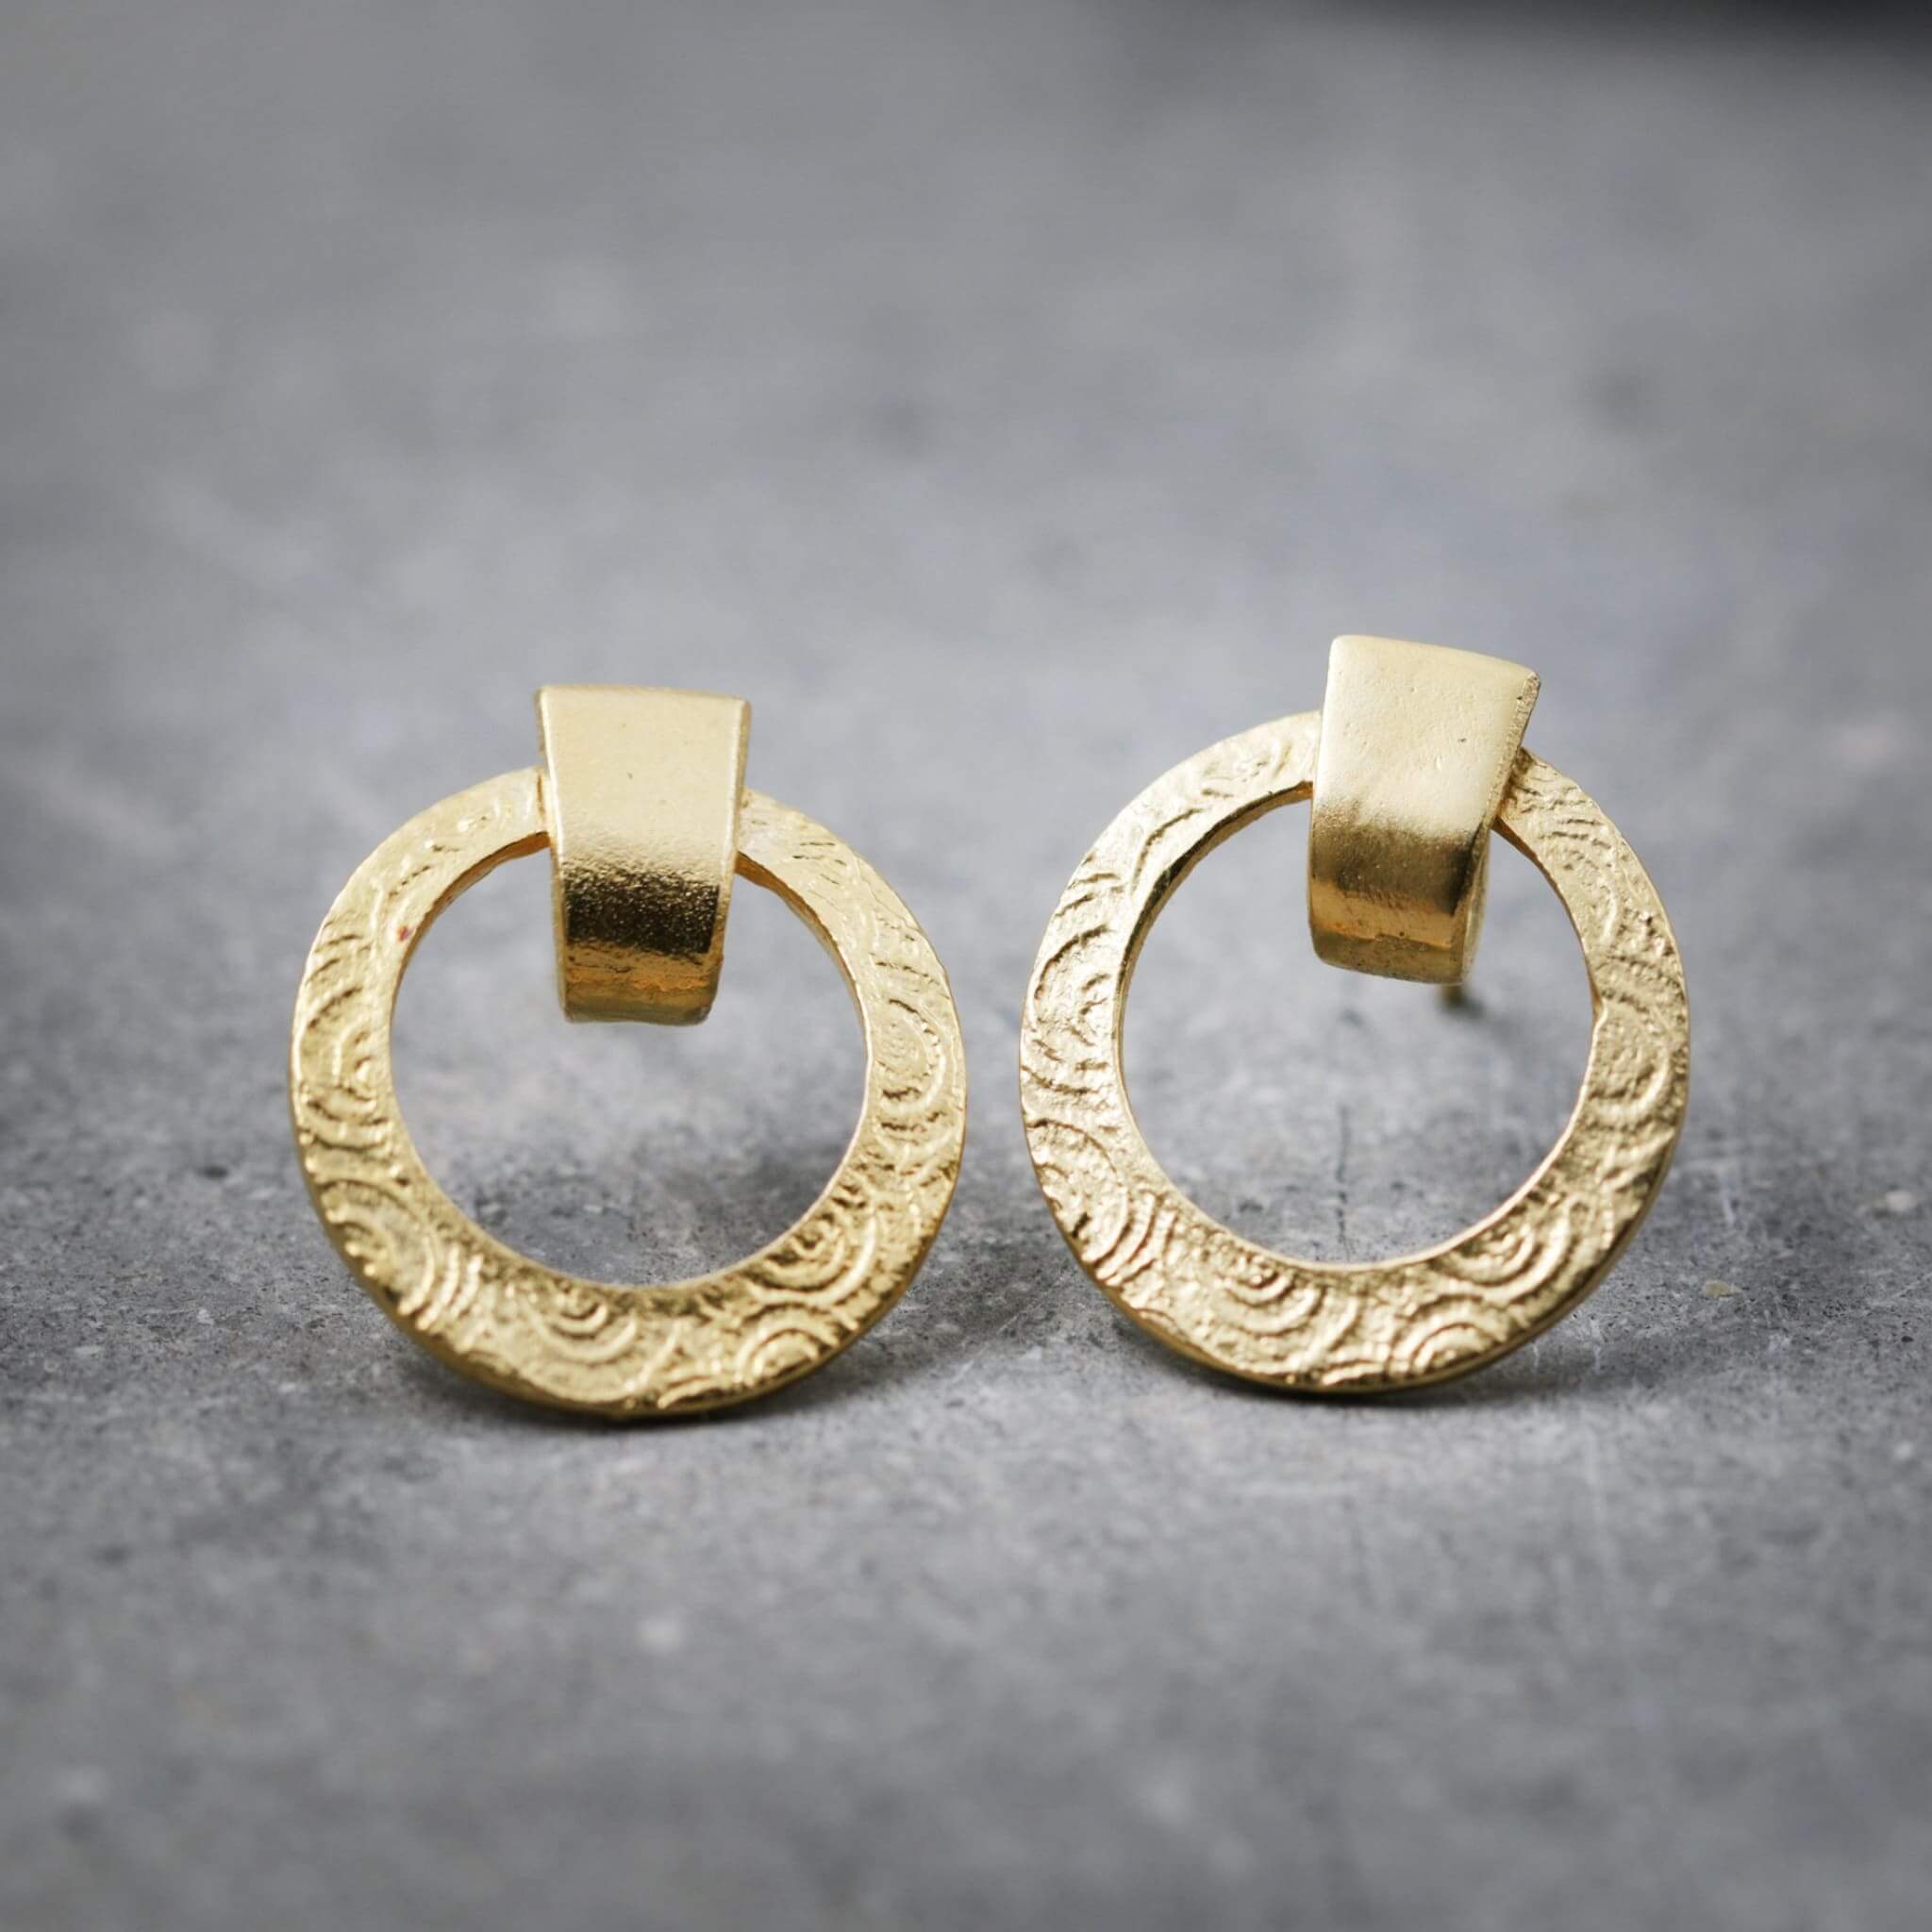 Women's Signature Brand Earrings in Sterling Silver with Gold Plated | Odda75